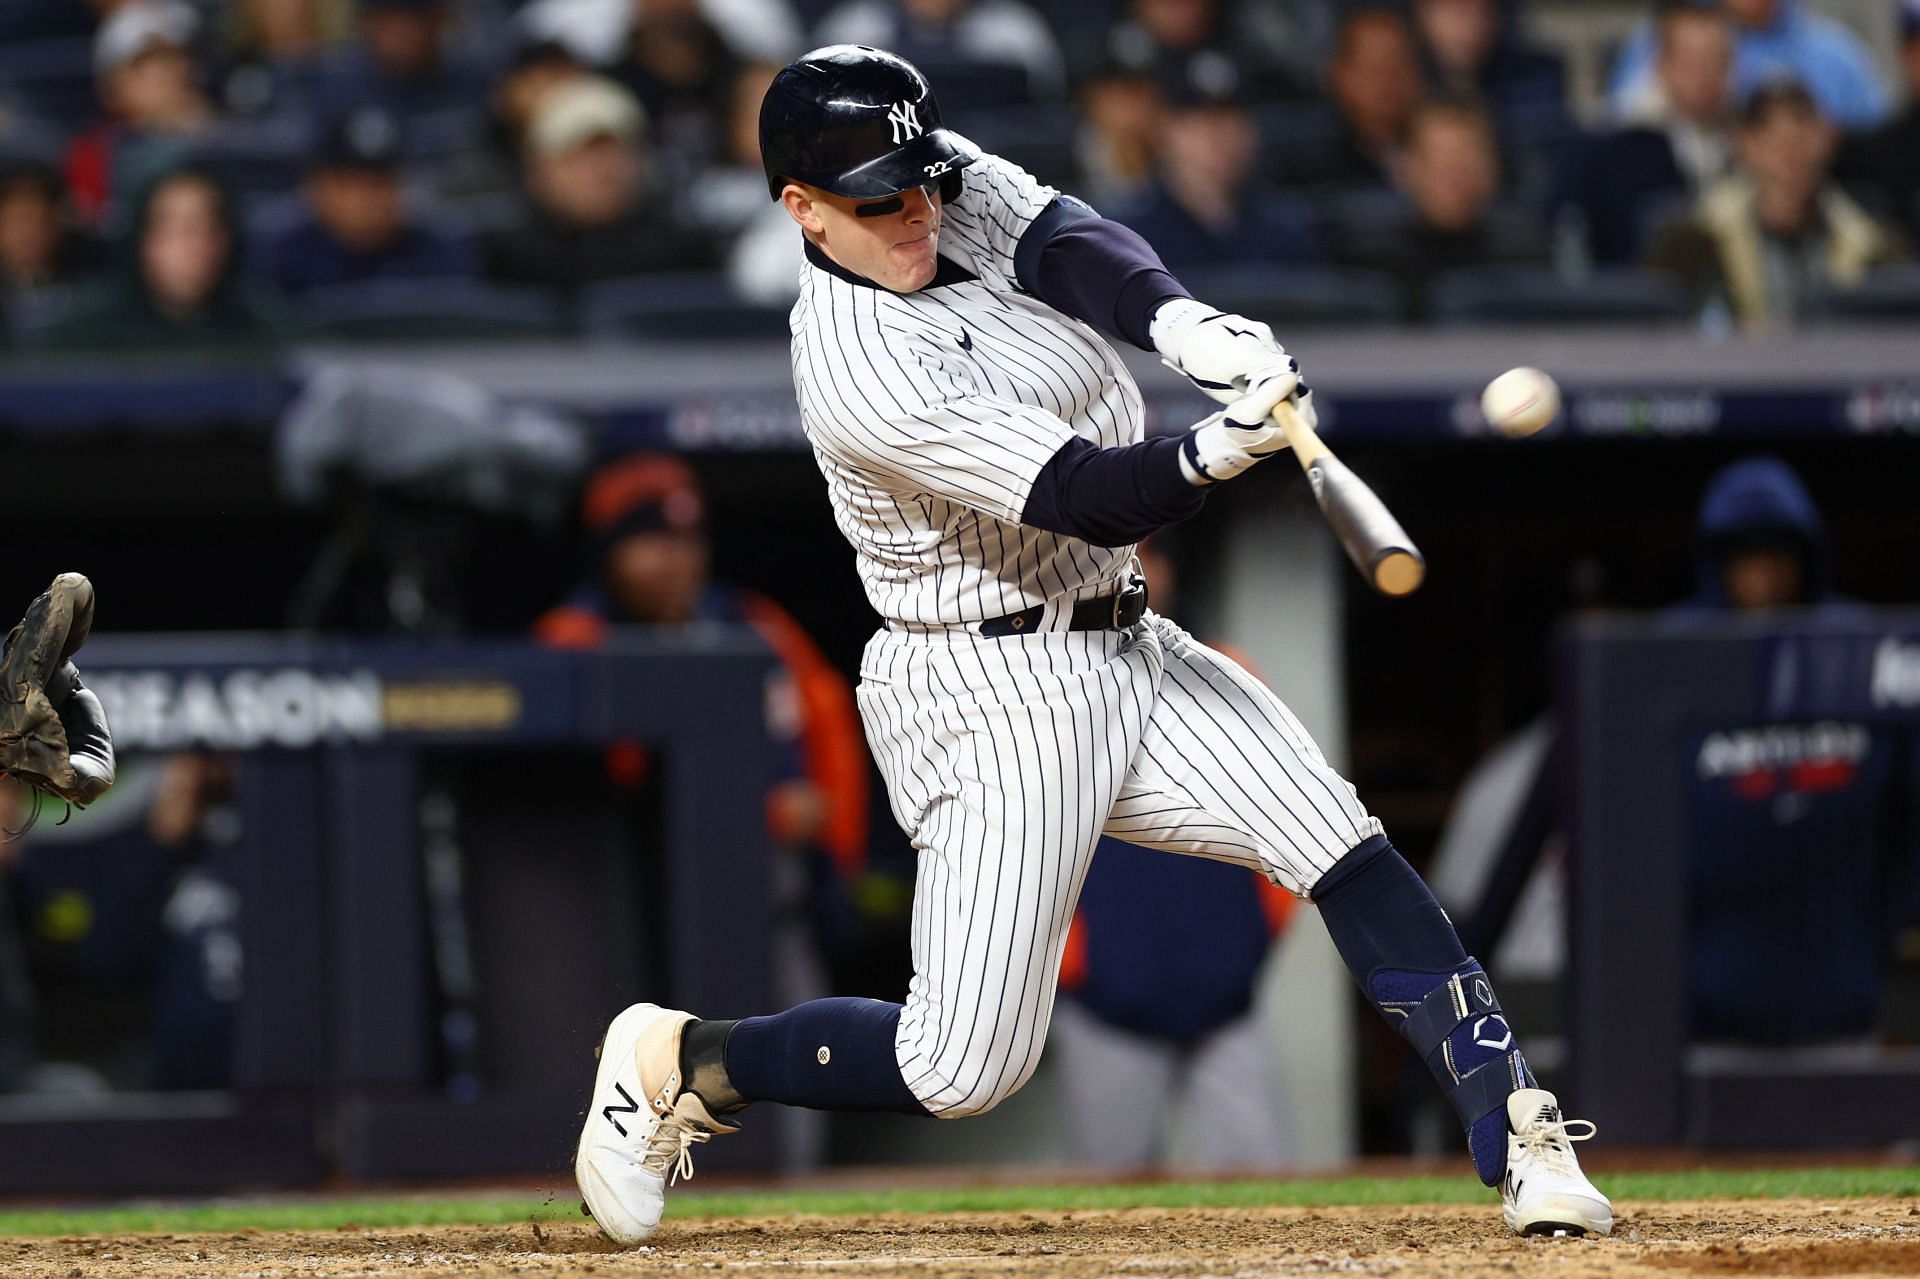 New Yankees CF Harrison Bader looks completely different in Players'  Tribune piece